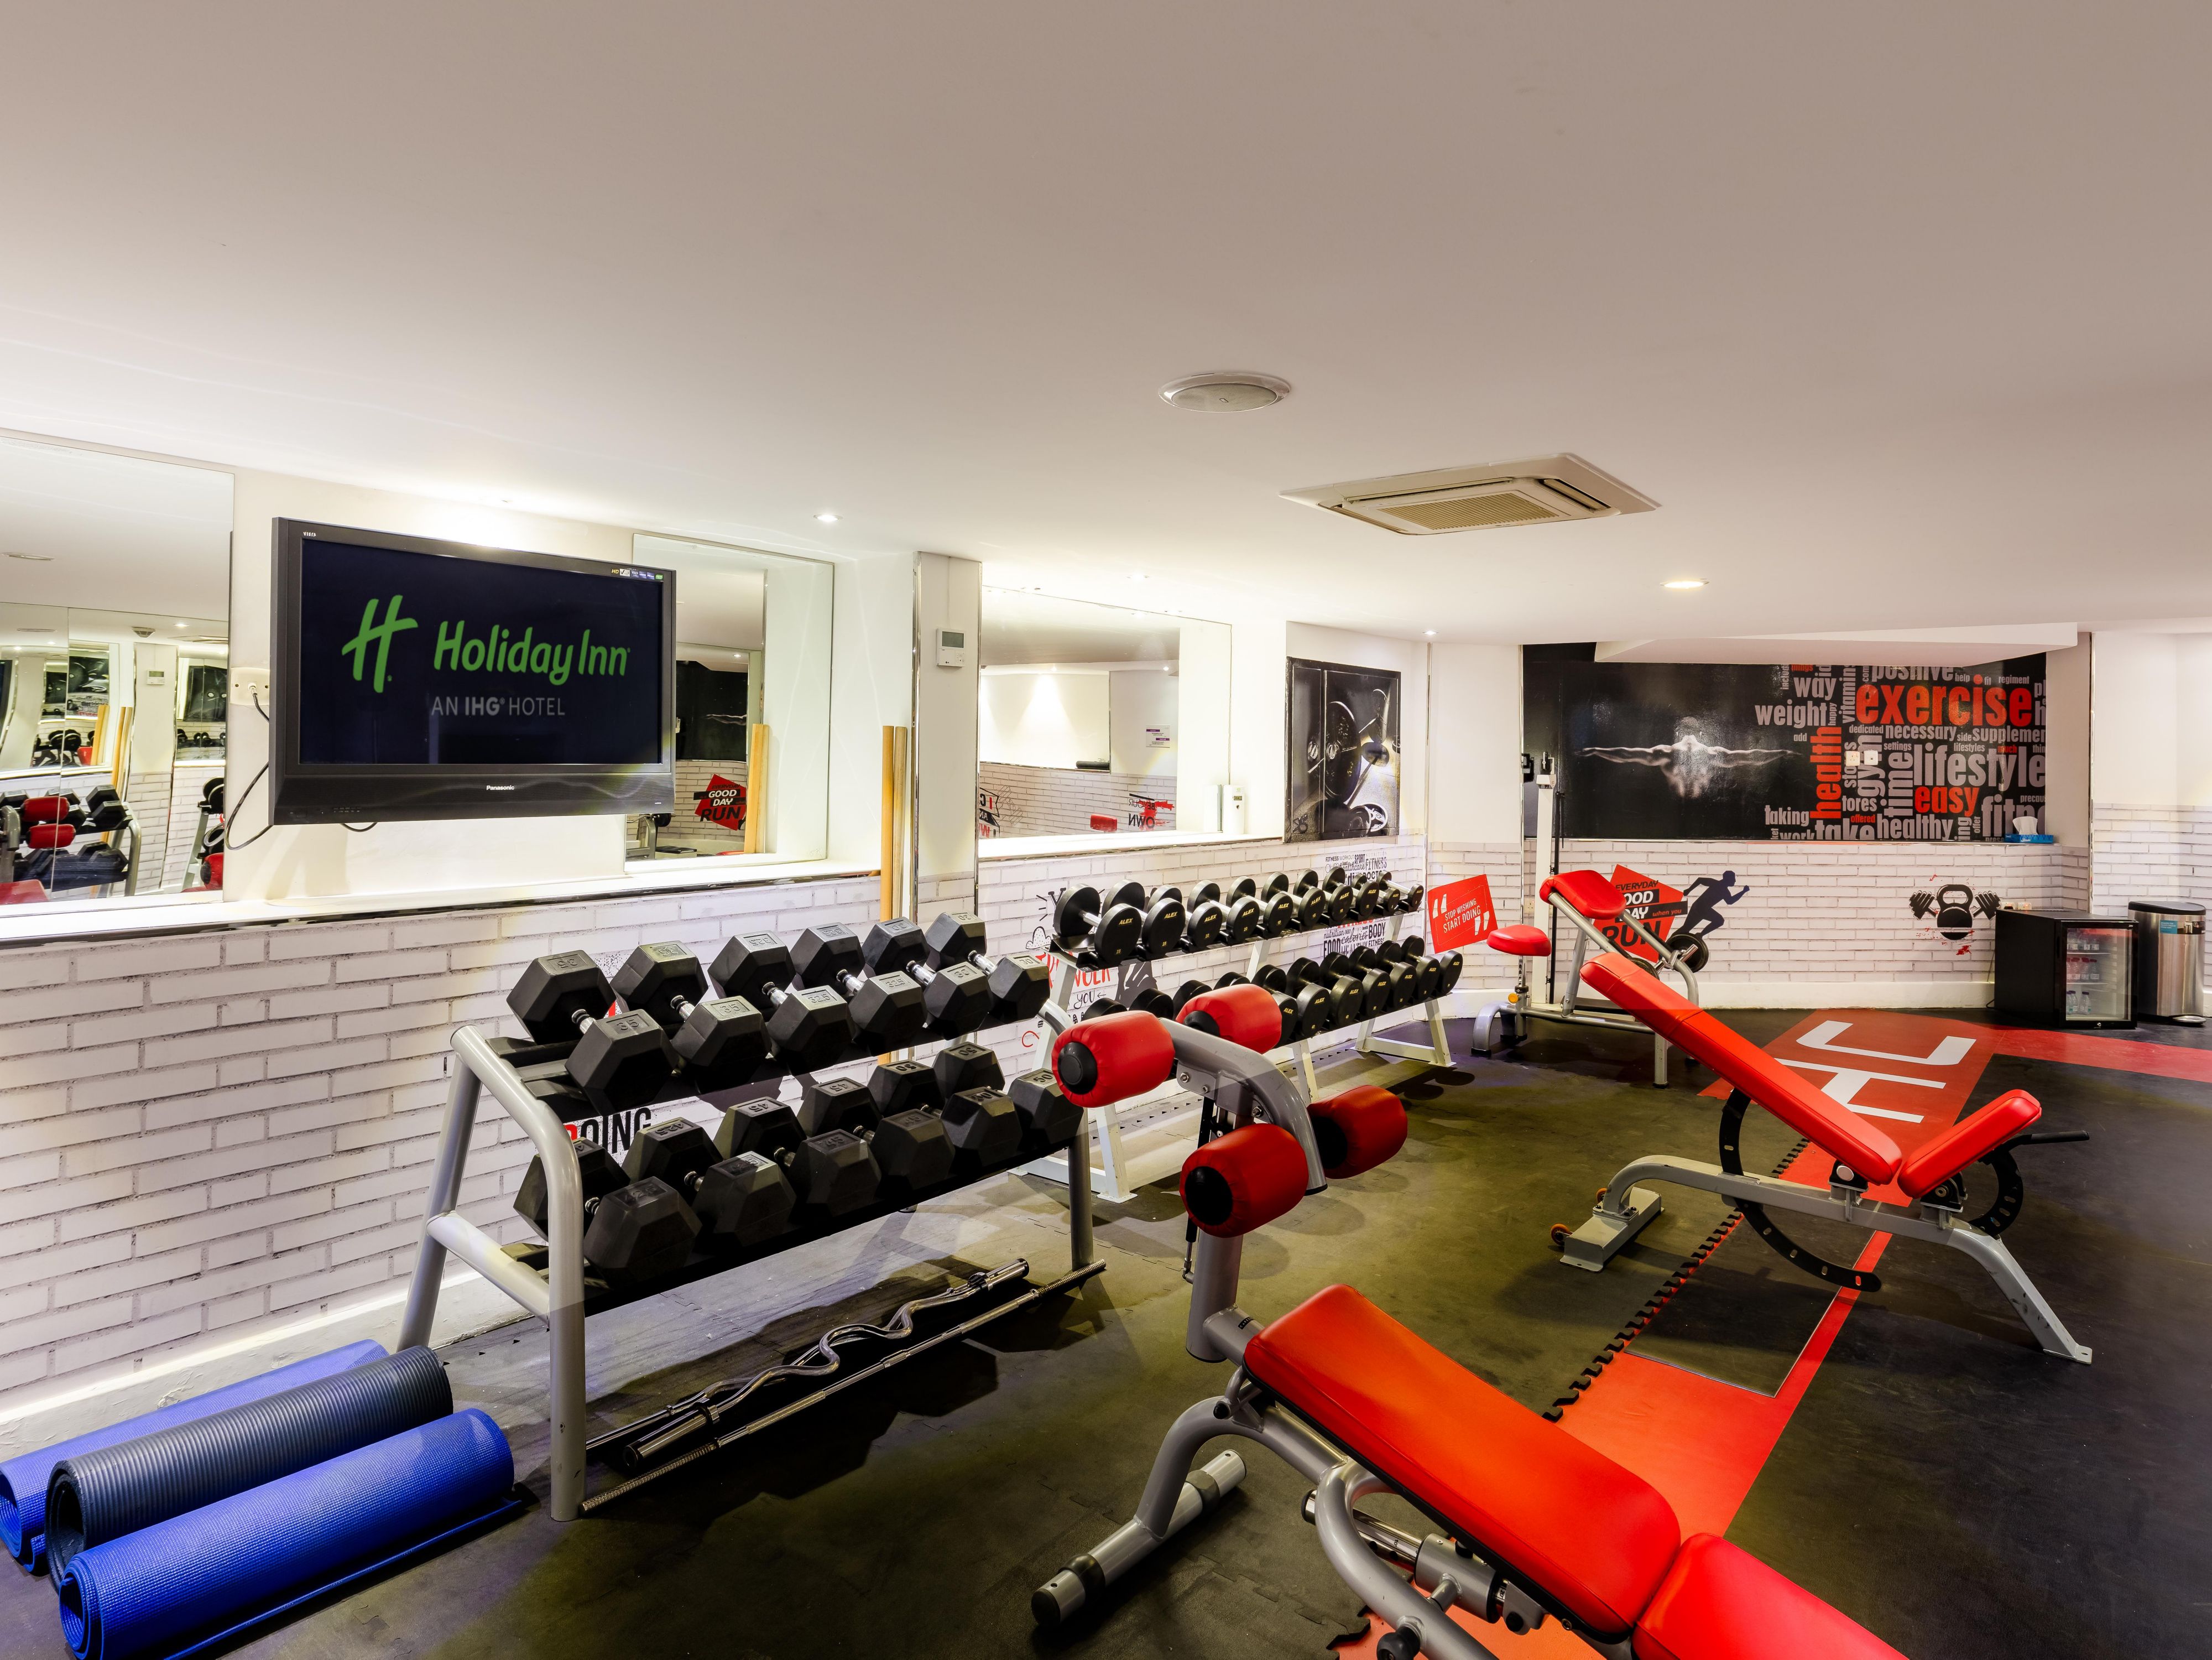 H-Care Health Club is located at the lobby level available 7 days a week throughout the day until 11 in the late evening where you can indulge yourself with state-of-the-art fitness equipment, and end your workout with a swim or a sauna session.